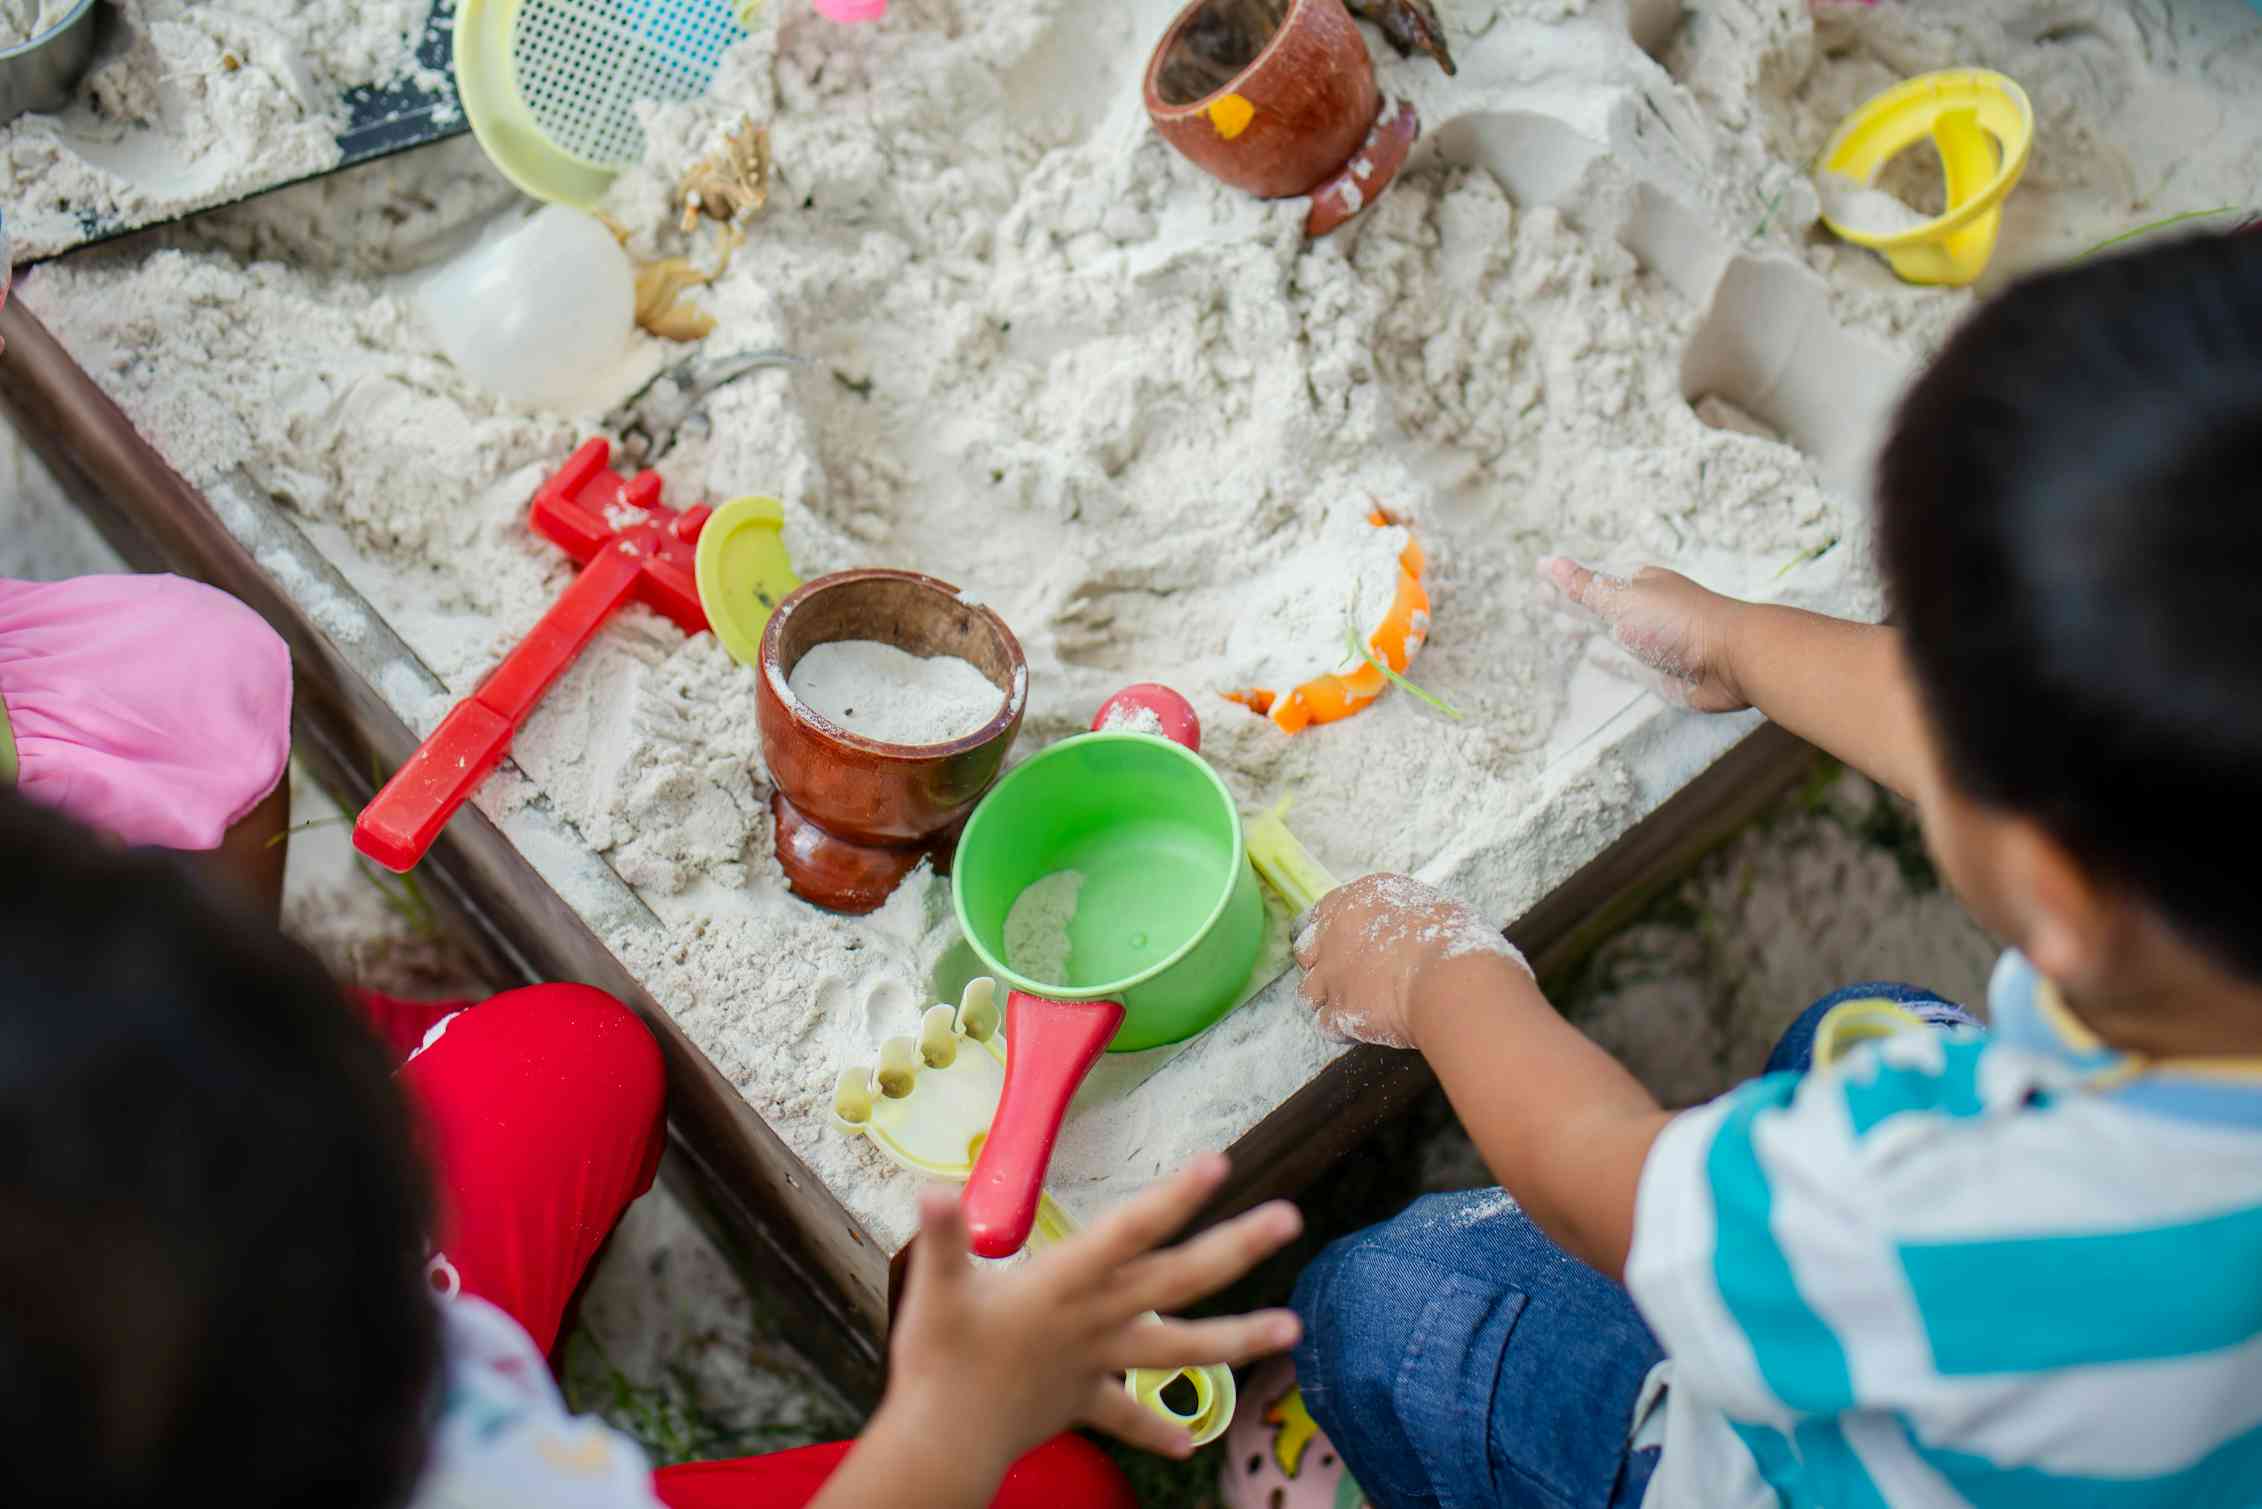 Children seen with sand and toys.